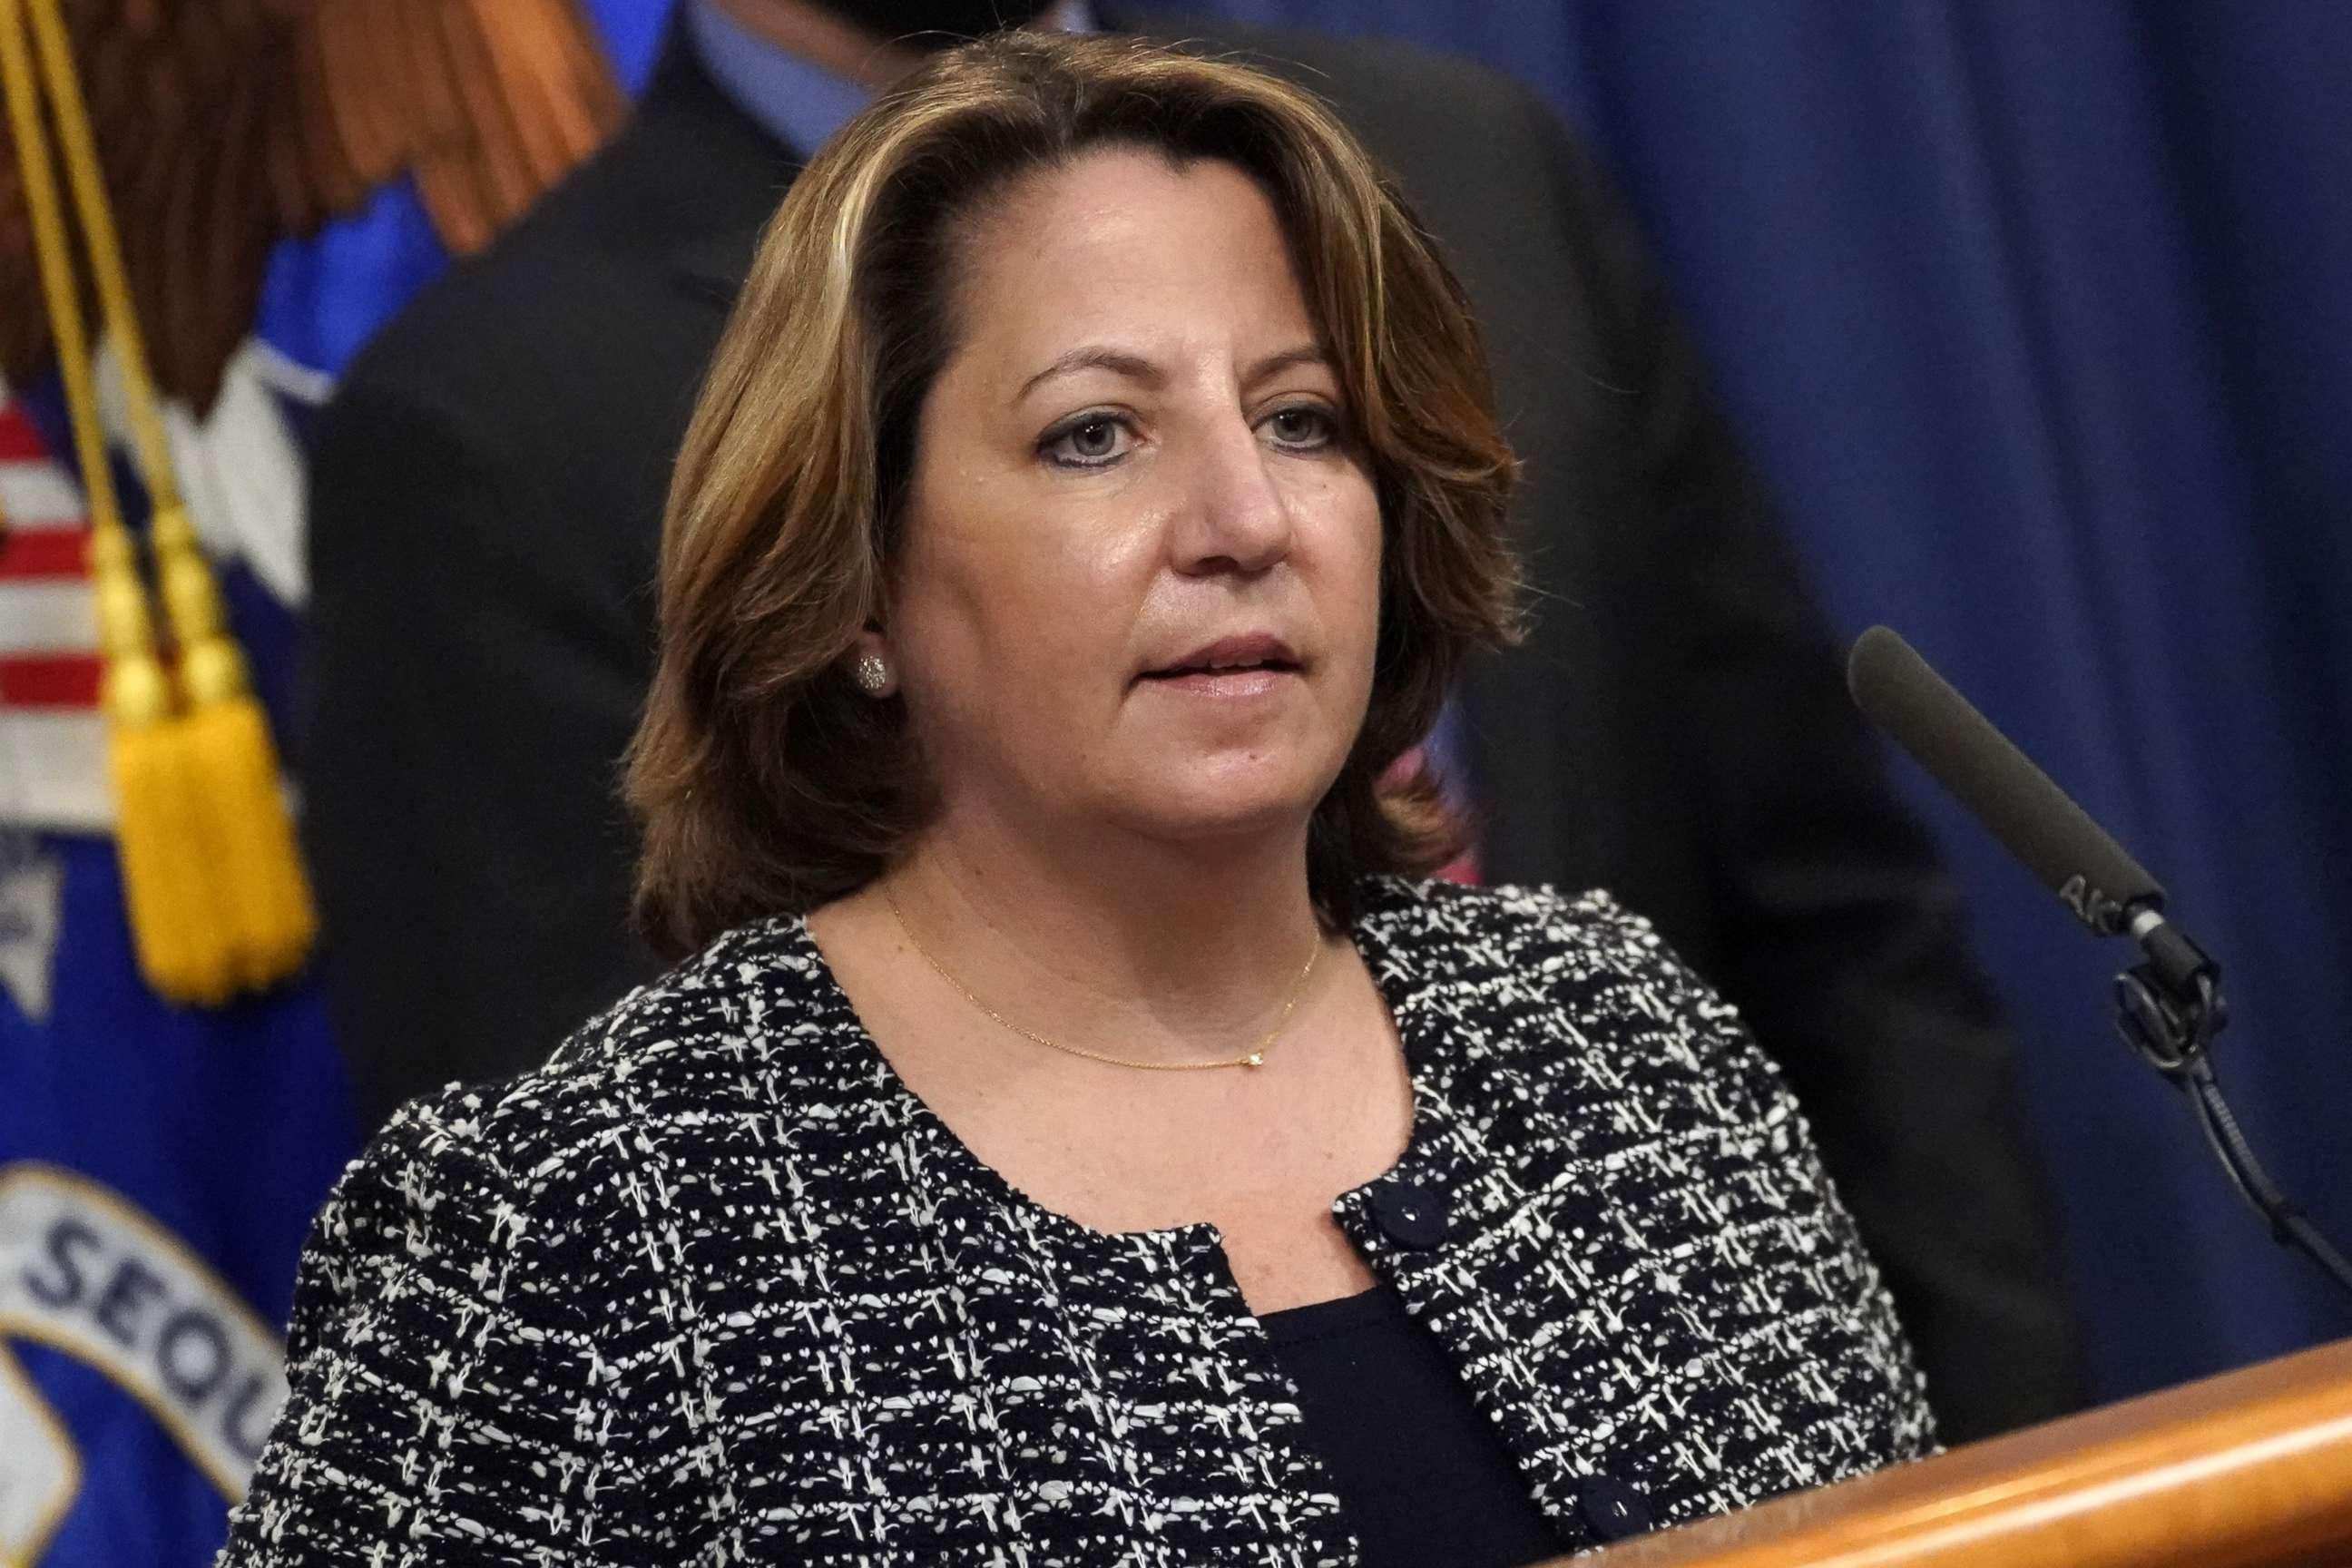 PHOTO: Lisa Monaco, deputy U.S. attorney general, speaks during a news conference at the Department of Justice in Washington, D.C., Nov. 8, 2021.